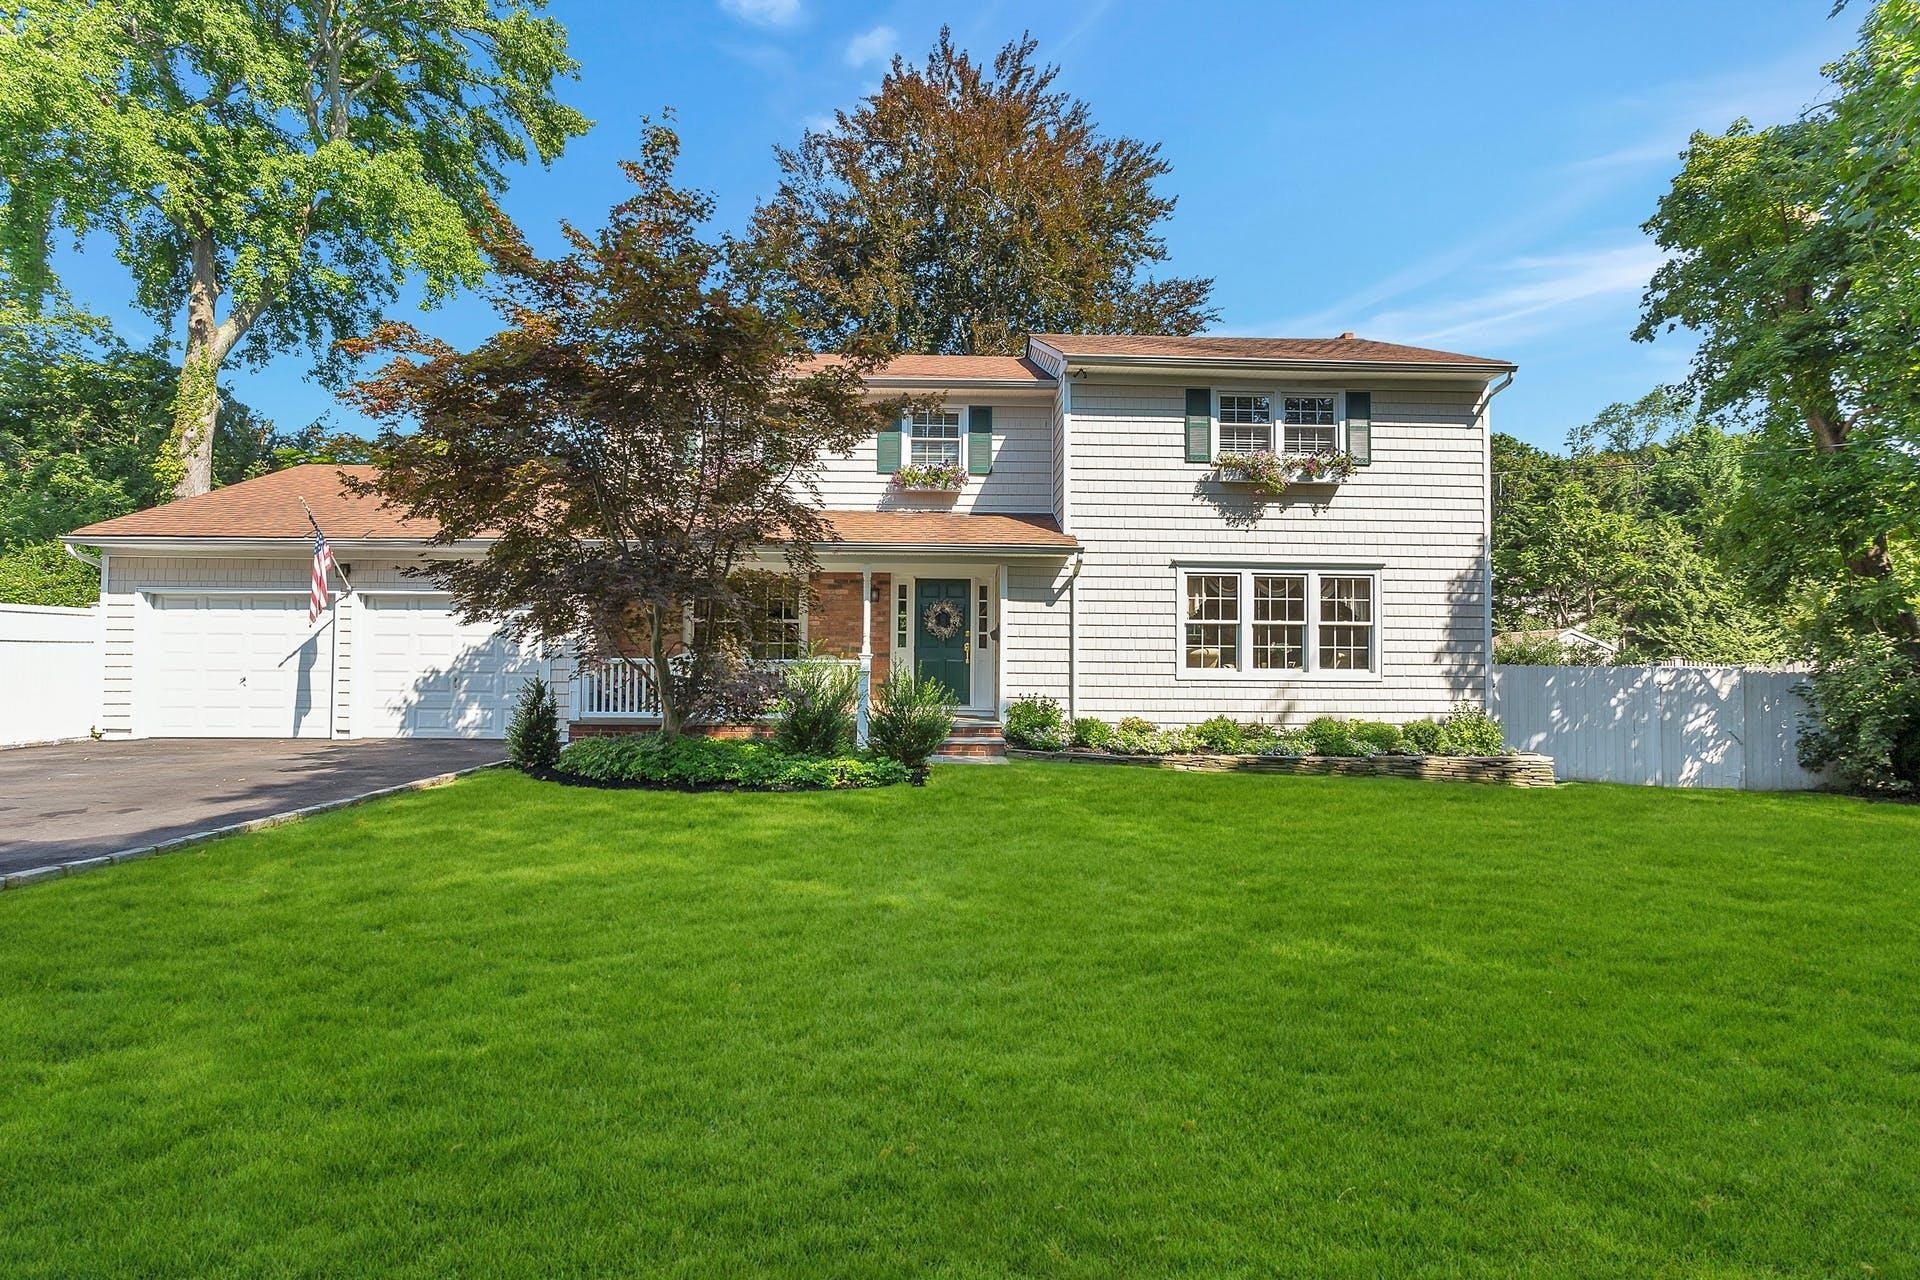 Single Family Home at Locust Valley